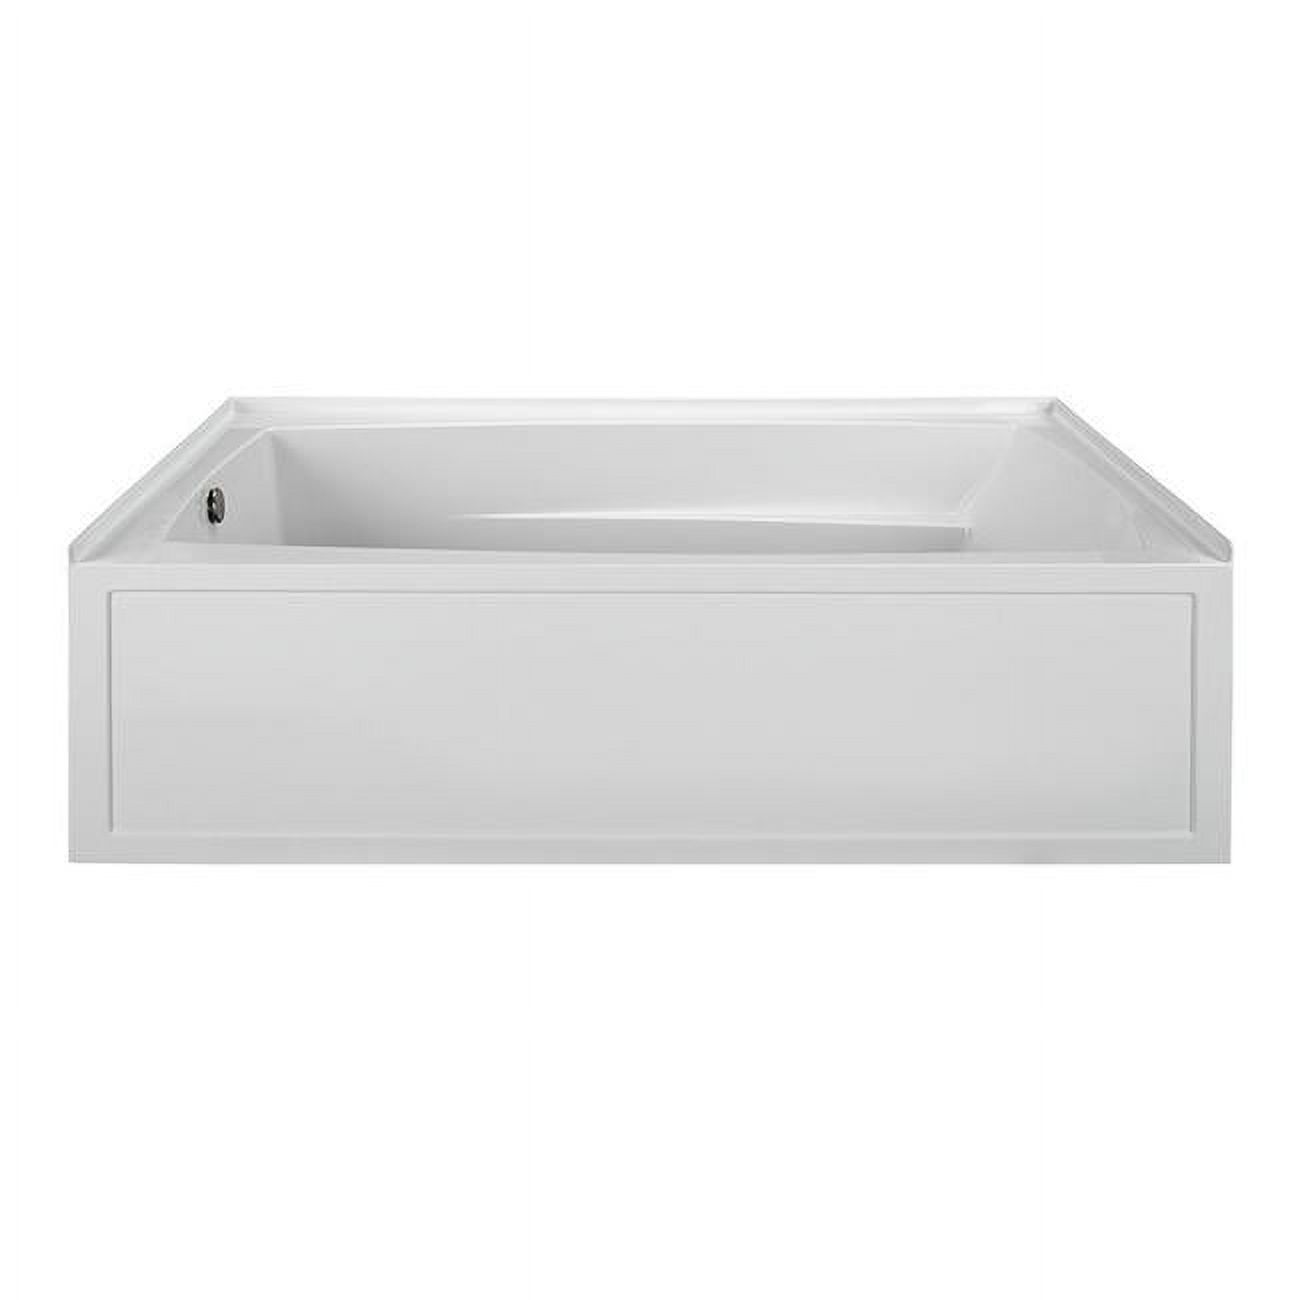 Integral Skirted End Drain Soaking Bath, White - 72 x 42 x 21 in. - image 1 of 1